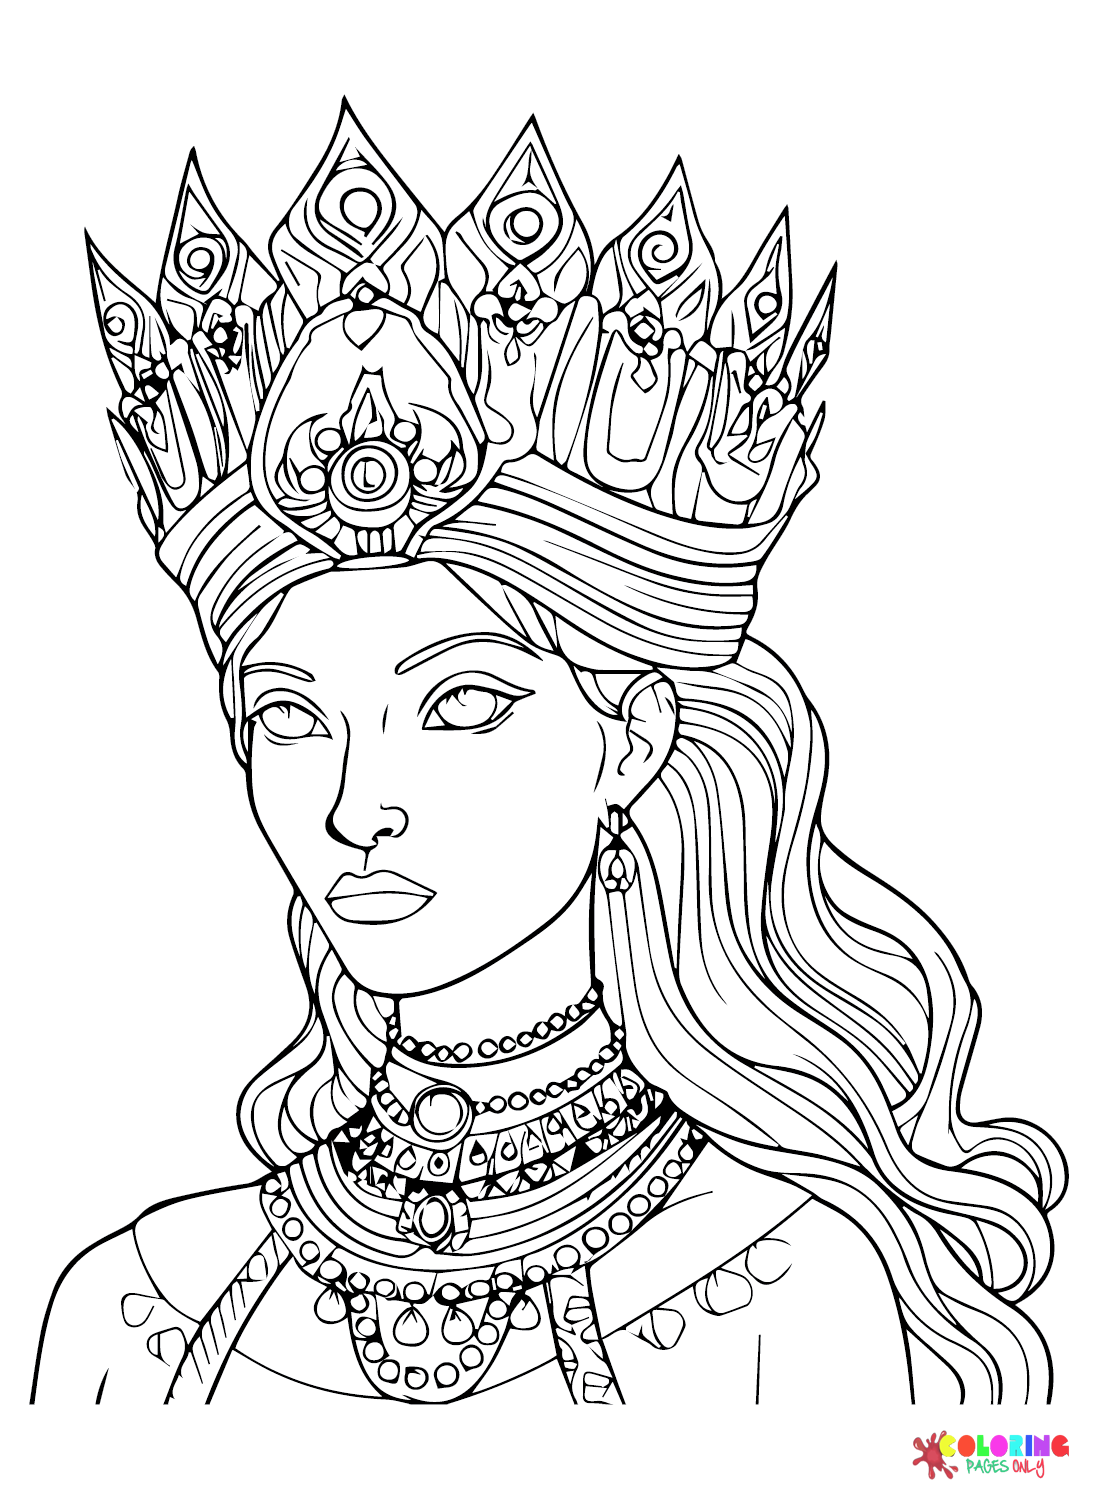 Queen coloring pages printable for free download